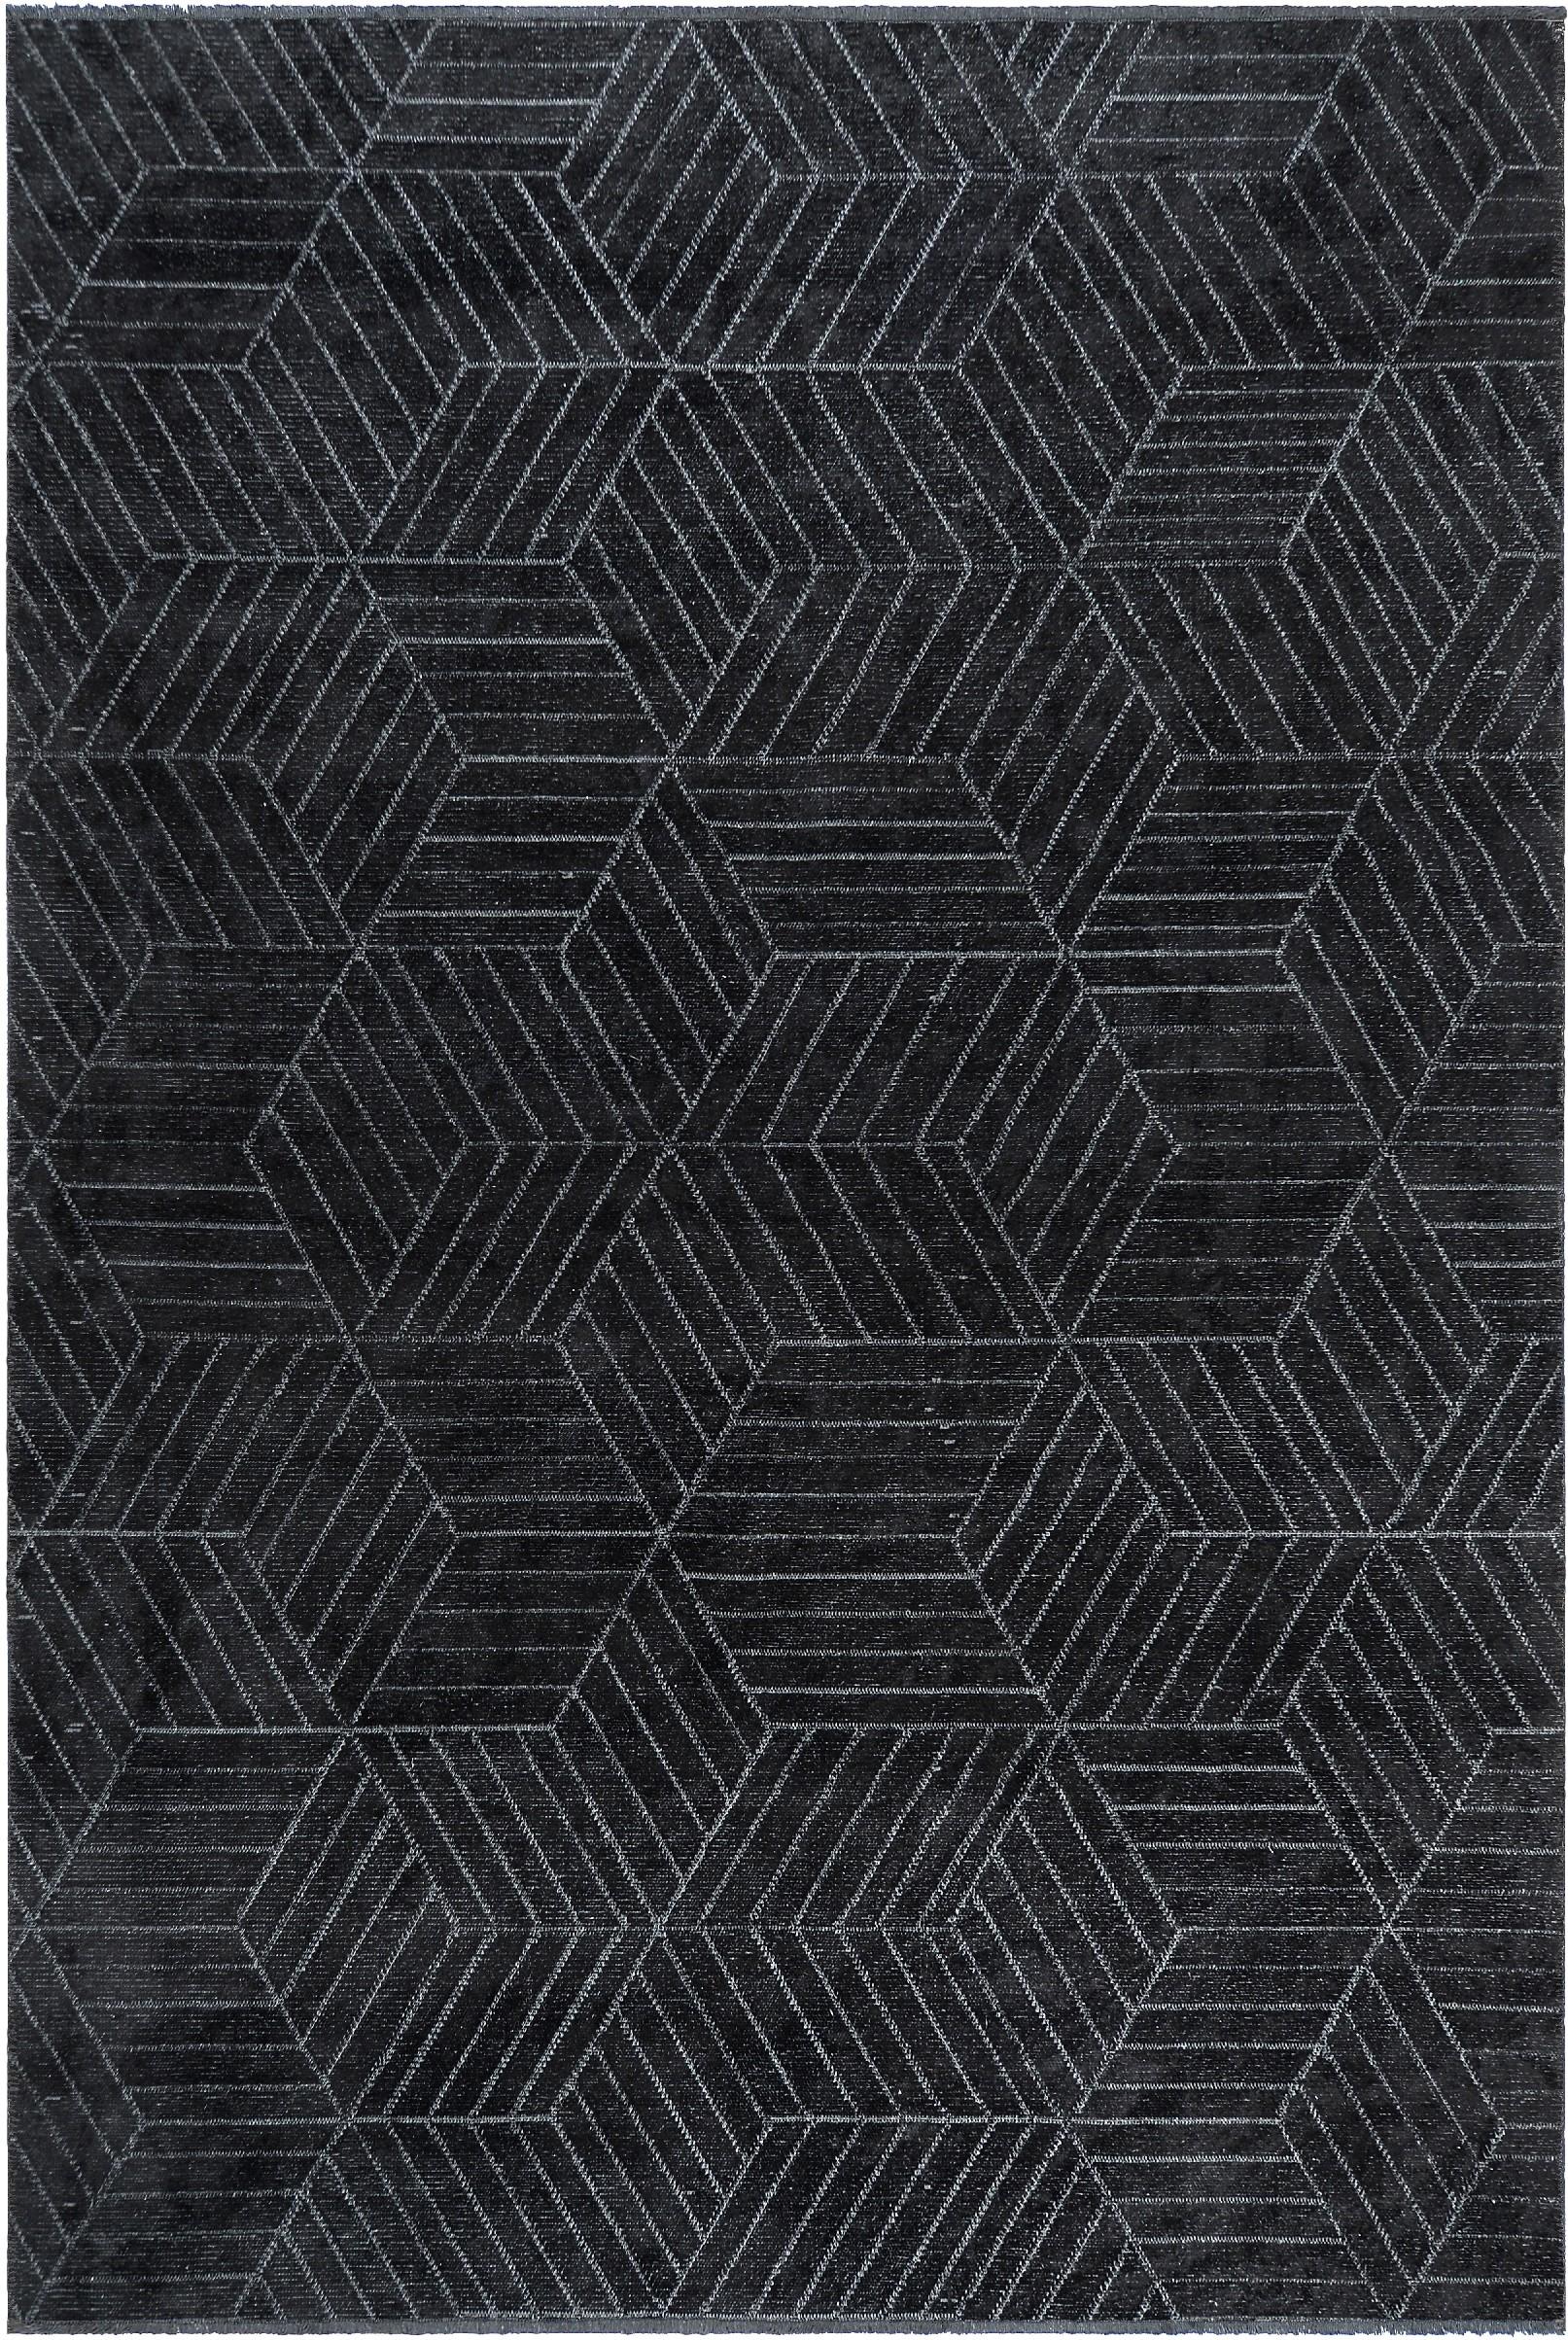 For Sale:  (Black) Contemporary Geometric Luxury Hand-Finished Area Rug